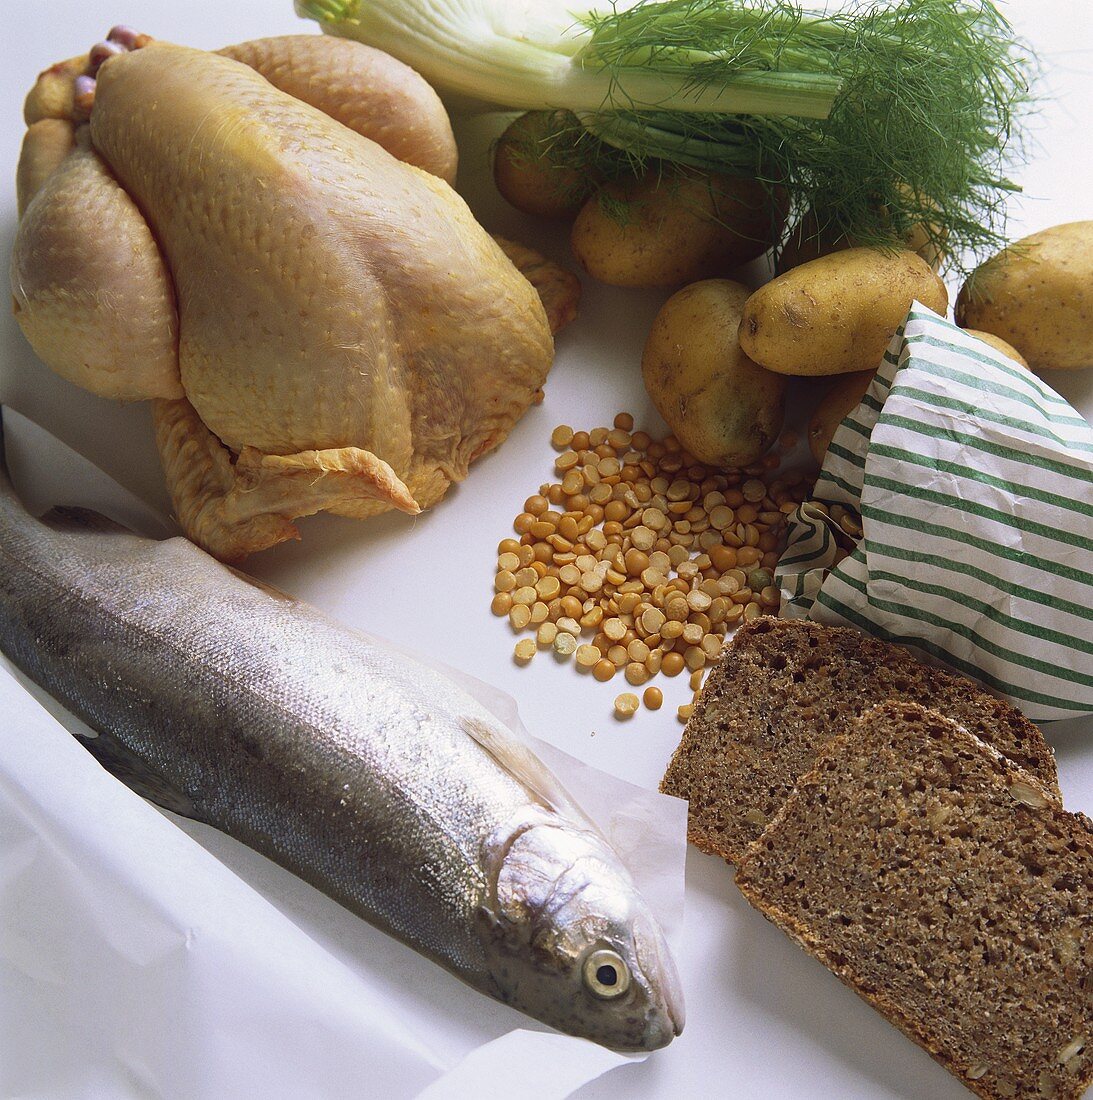 Fish; poultry; bread; lentils and vegetables